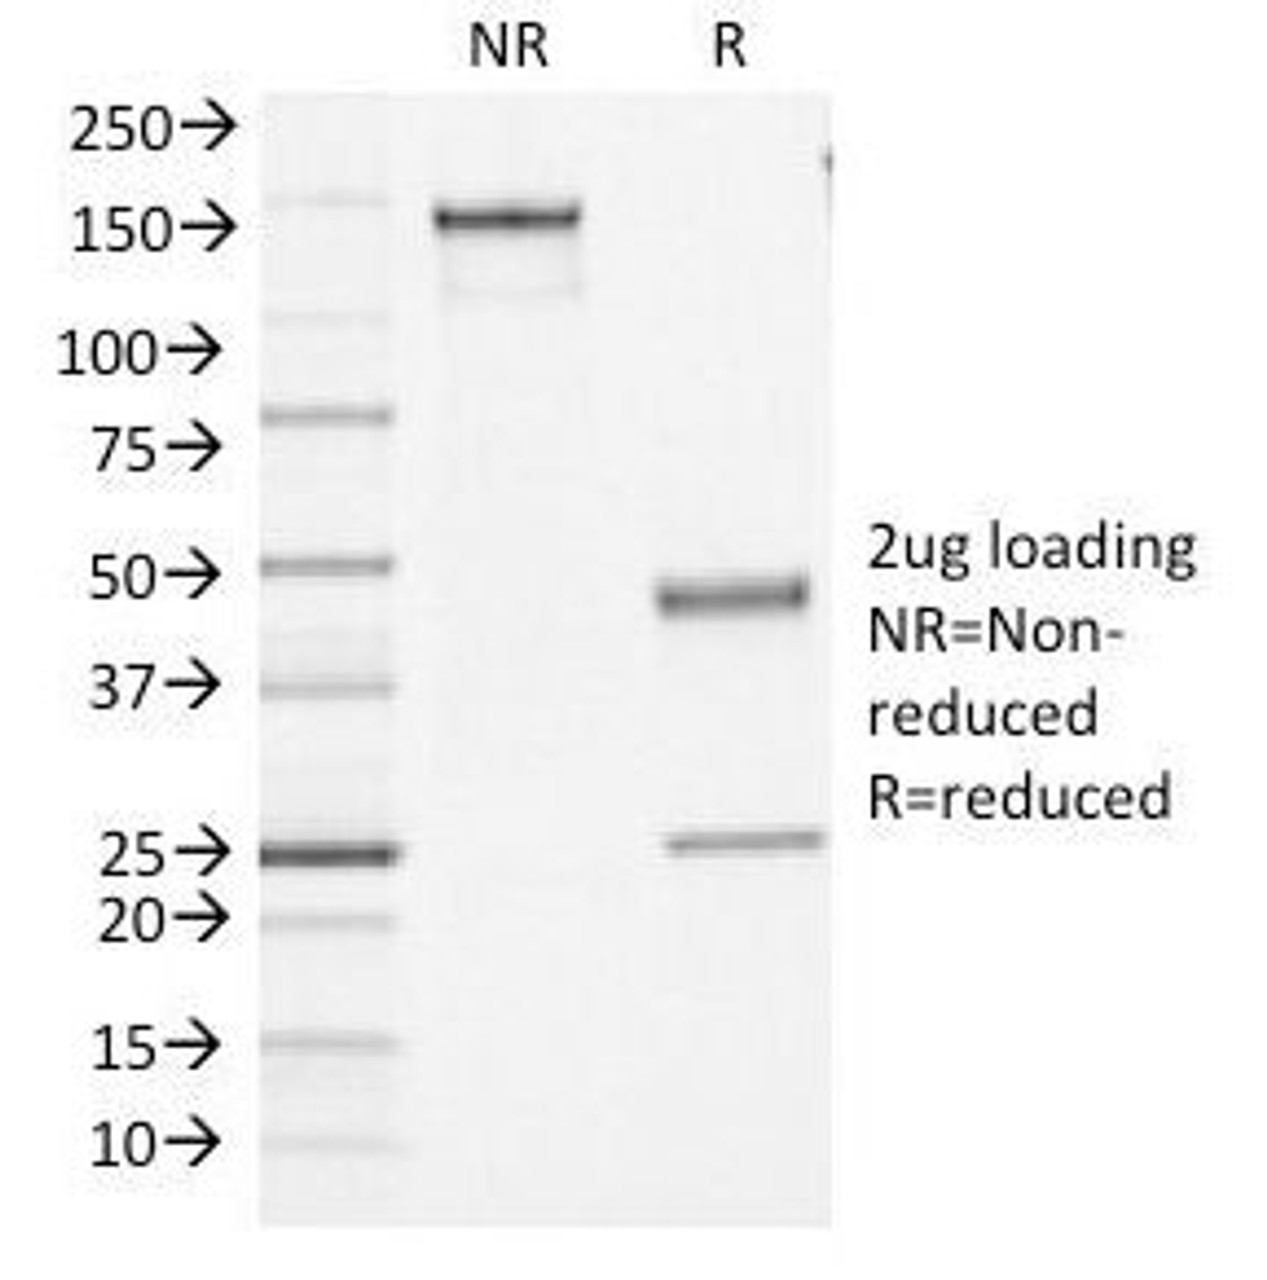 SDS-PAGE Analysis of Purified, BSA-Free CD45 Antibody (clone PTPRC/1461) . Confirmation of Integrity and Purity of the Antibody.